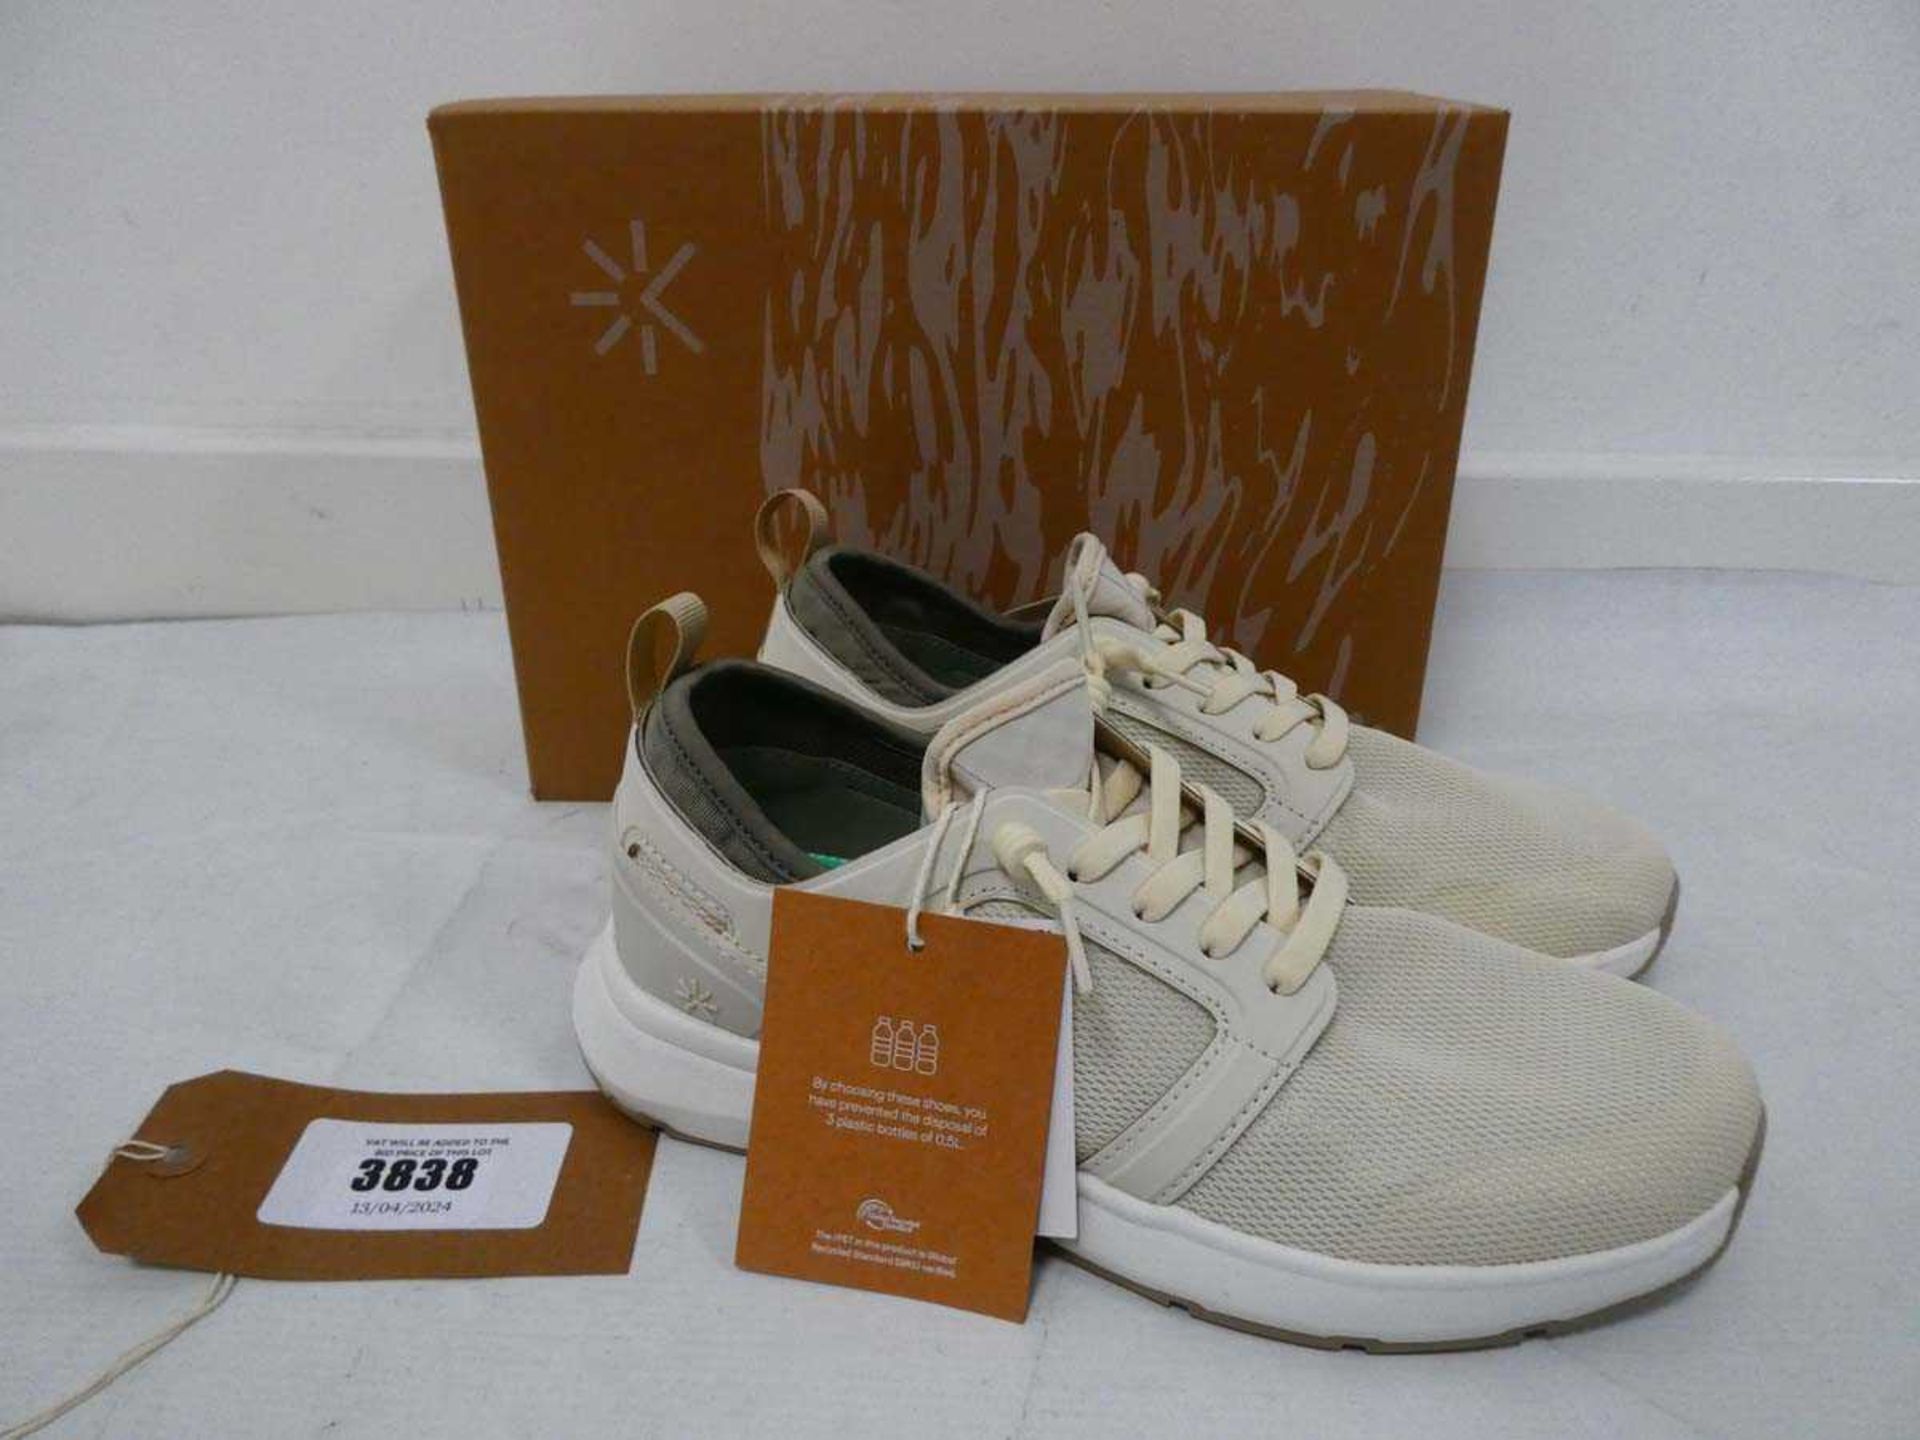 +VAT Boxed pair of Tropicfeel monsoon trainers in almond white size EU40